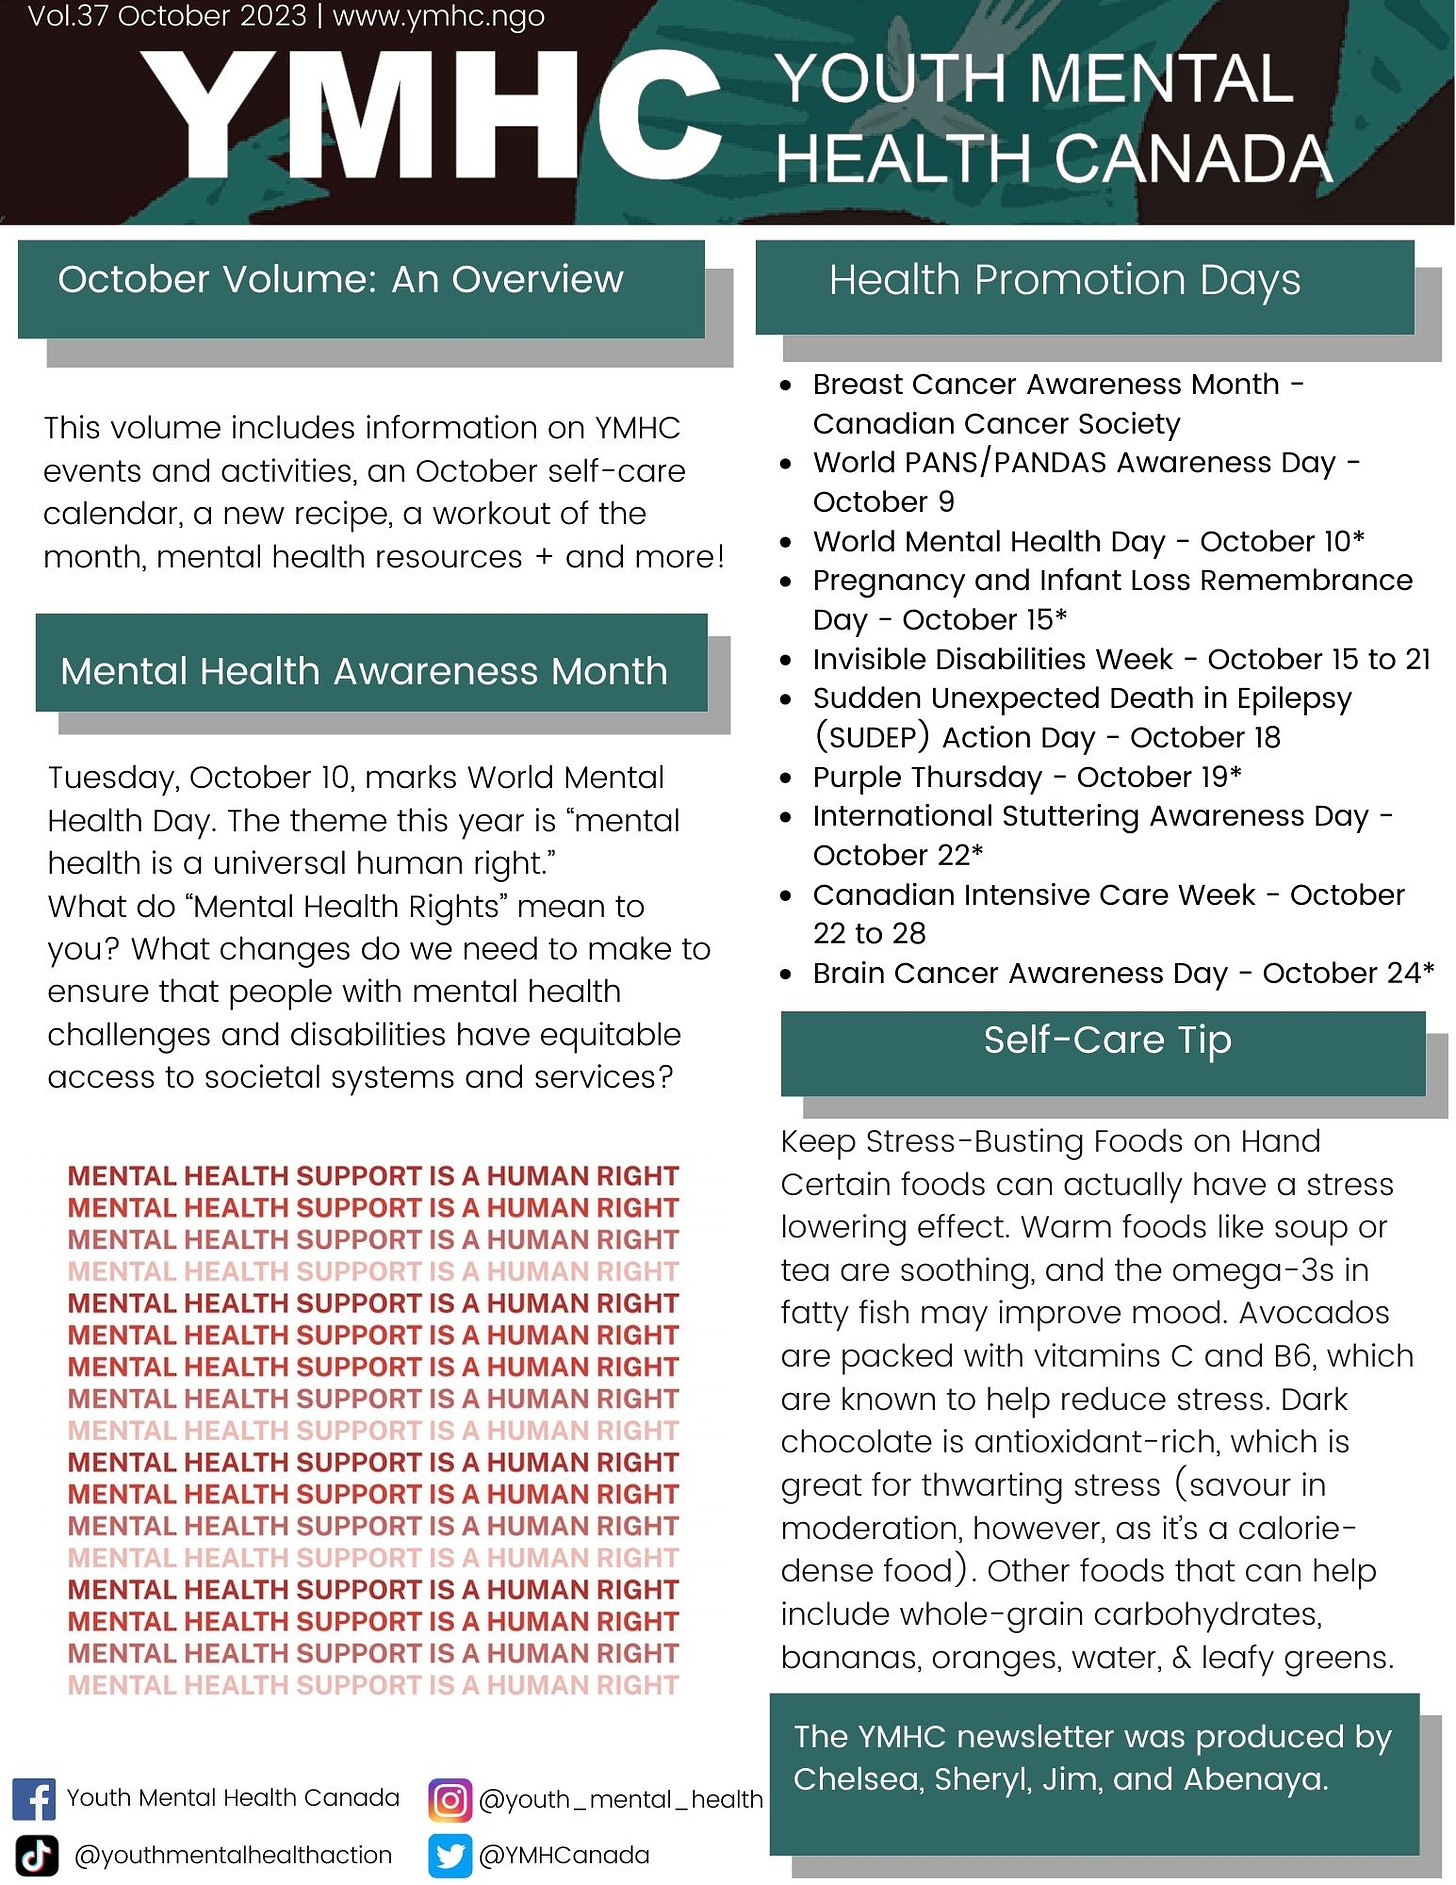 October Newsletter Welcome to the October volume of our newsletter! In this edition, we have a variety of exciting content, including information on YMHC events and activities, a self-care calendar for October, a new recipe, a workout of the month, and mental health resources. Read on to find out more!  Mental Health Awareness Month Tuesday, October 10, marks World Mental Health Day. The theme for this year is "mental health is a universal human right." It is important to reflect on what "Mental Health Rights" mean to us and consider the changes needed to ensure equitable access to societal systems and services for people with mental health challenges and disabilities.  Keep Stress-Busting Foods on Hand Certain foods can have a stress-lowering effect. Warm foods like soup or tea are soothing, and the omega-3s in fatty fish may improve mood. Avocados, packed with vitamins C and B6, are known to help reduce stress. Dark chocolate, rich in antioxidants, is also great for thwarting stress (enjoy in moderation due to its calorie density). Other helpful foods include whole-grain carbohydrates, bananas, oranges, water, and leafy greens.  Self-Care Tip Health Promotion Days Breast Cancer Awareness Month - Canadian Cancer Society World PANS/PANDAS Awareness Day - October 9 World Mental Health Day - October 10* Pregnancy and Infant Loss Remembrance Day - October 15* Invisible Disabilities Week - October 15 to 21 Sudden Unexpected Death in Epilepsy (SUDEP) Action Day - October 18 Purple Thursday - October 19* International Stuttering Awareness Day - October 22* Canadian Intensive Care Week - October 22 to 28 Brain Cancer Awareness Day - October 24*